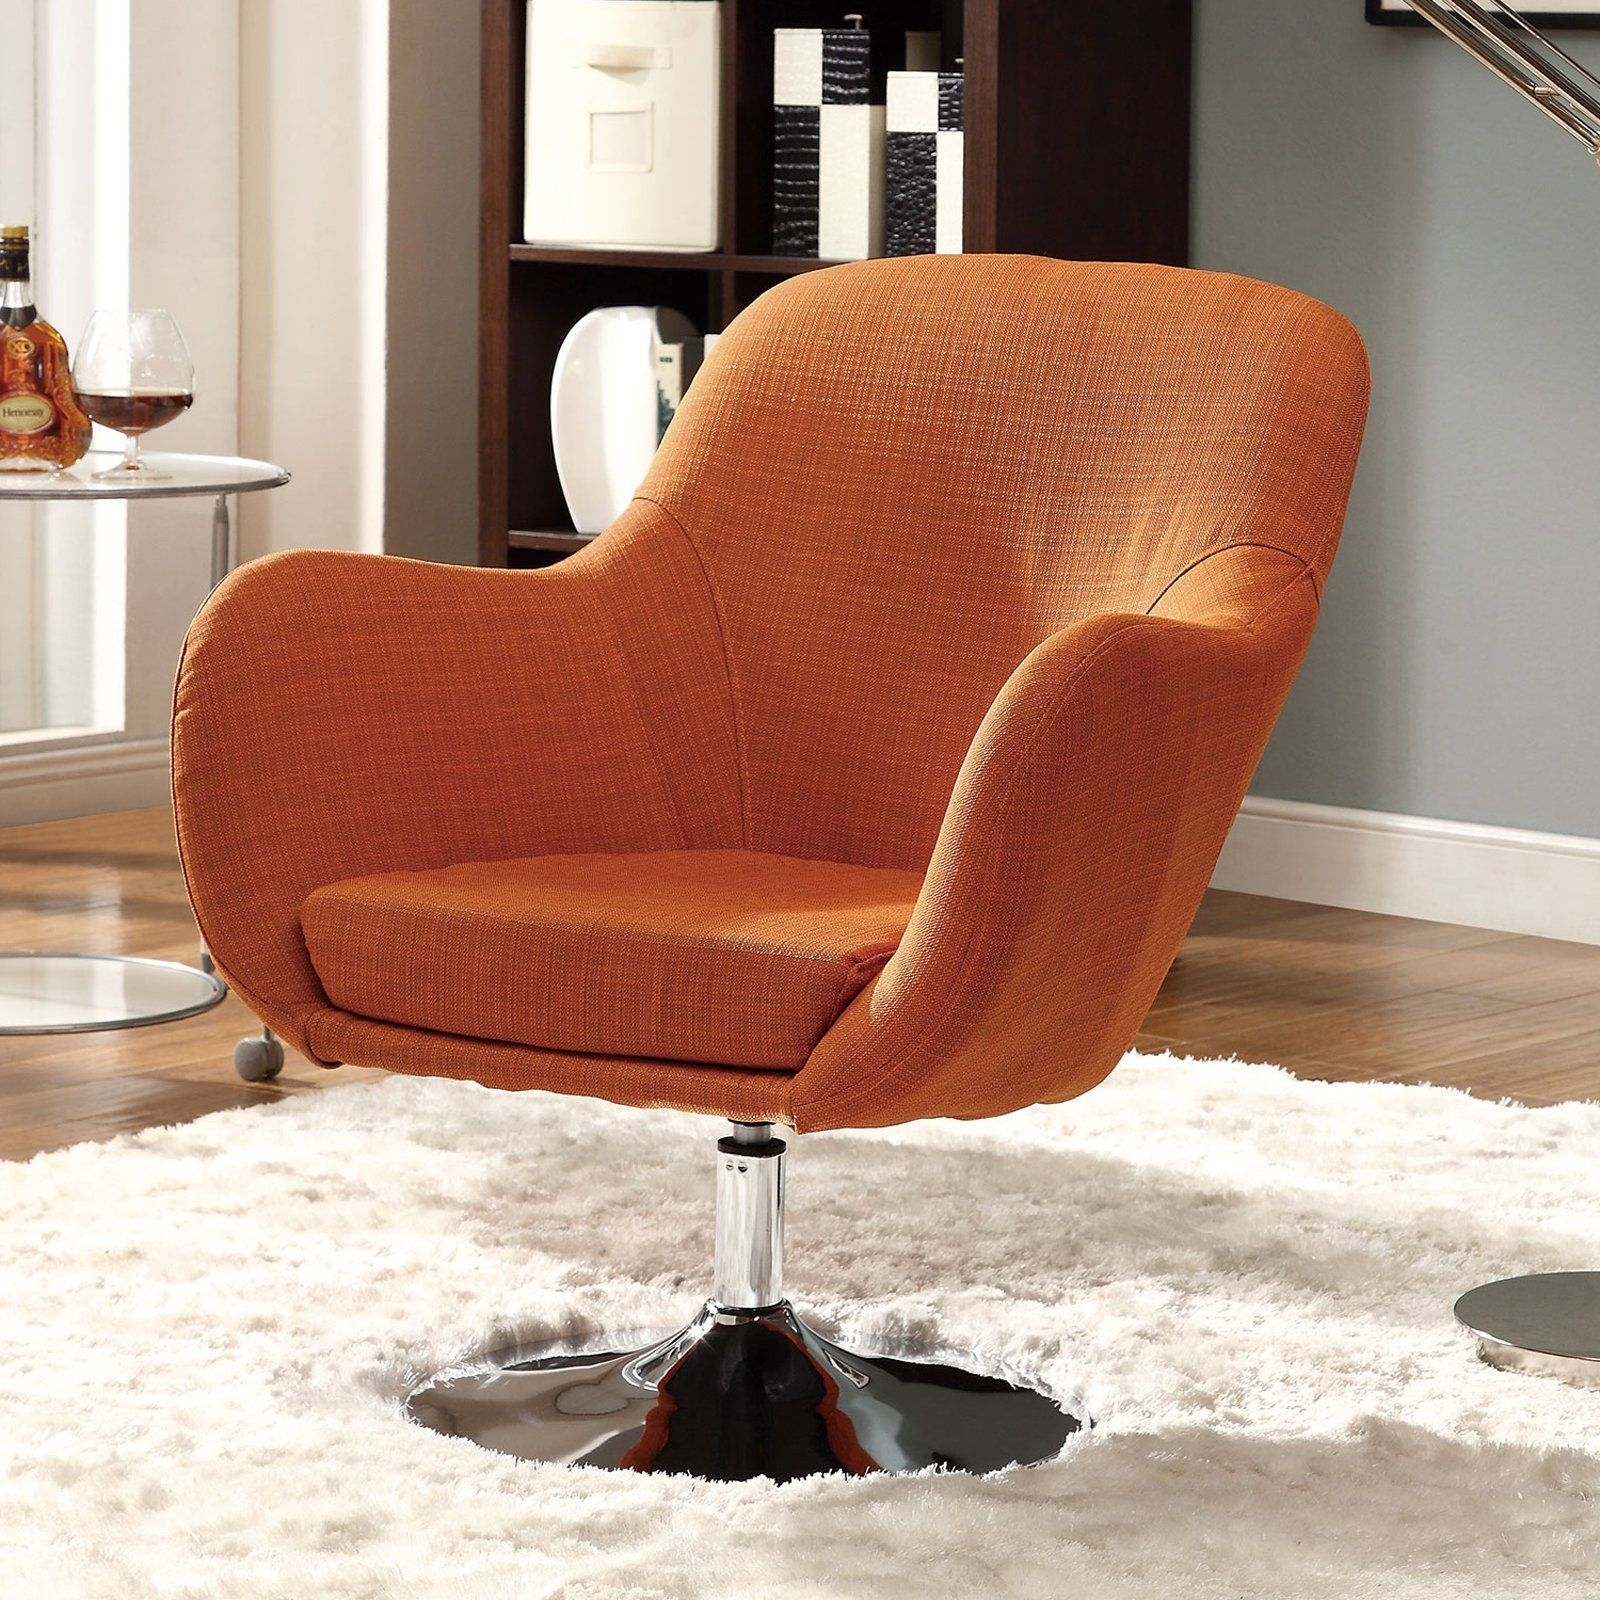 Coaster Home Furnishings 902148 Contemporary Swivel Chair with Chrome Base, Orange